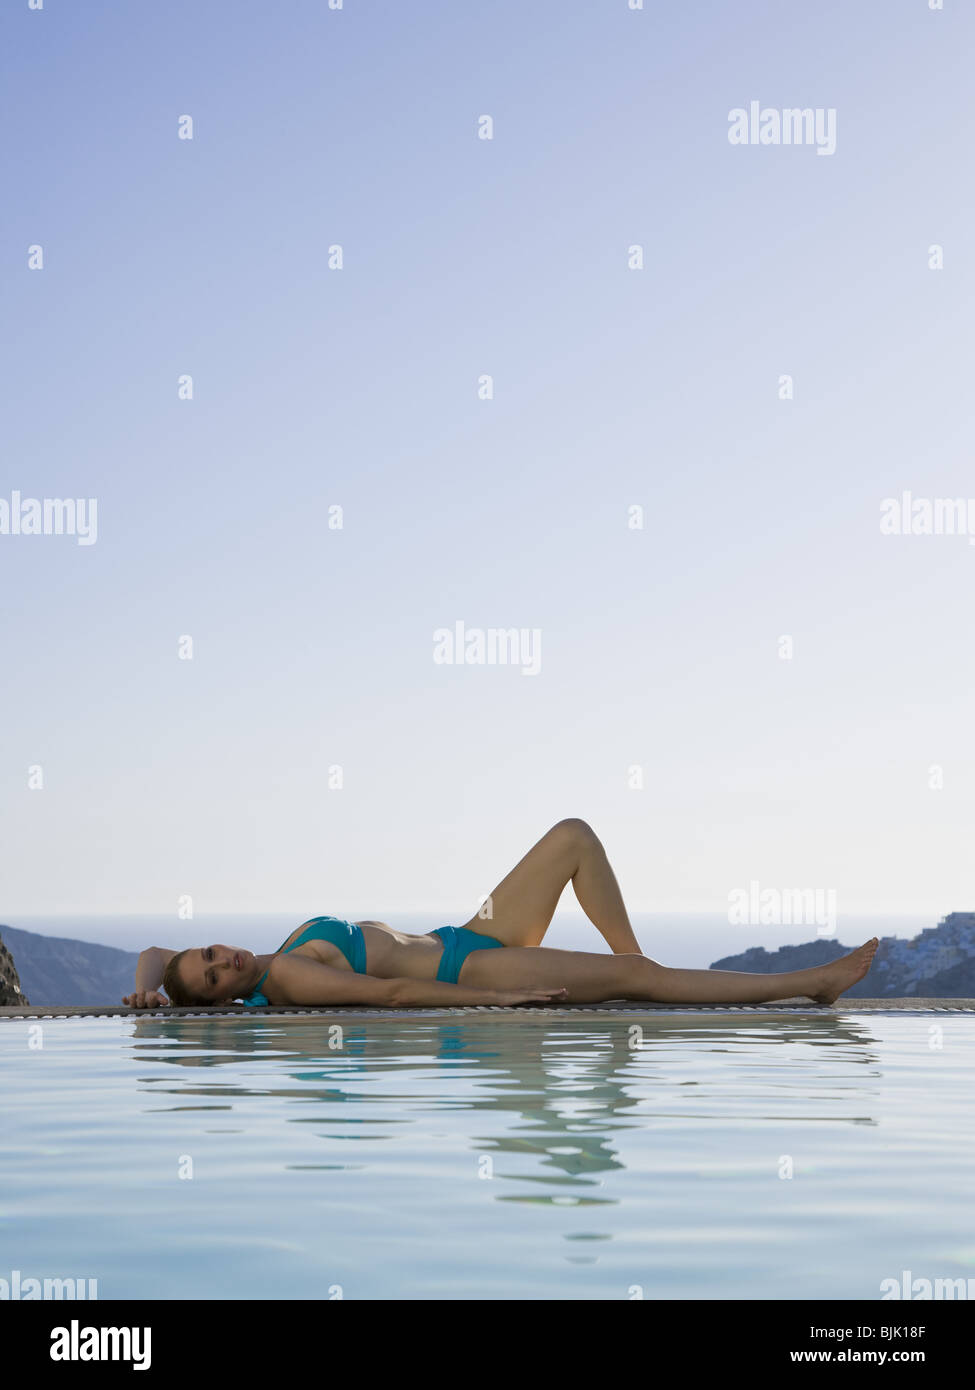 Woman in swimsuit reclining at edge of infinity pool outdoors Stock Photo